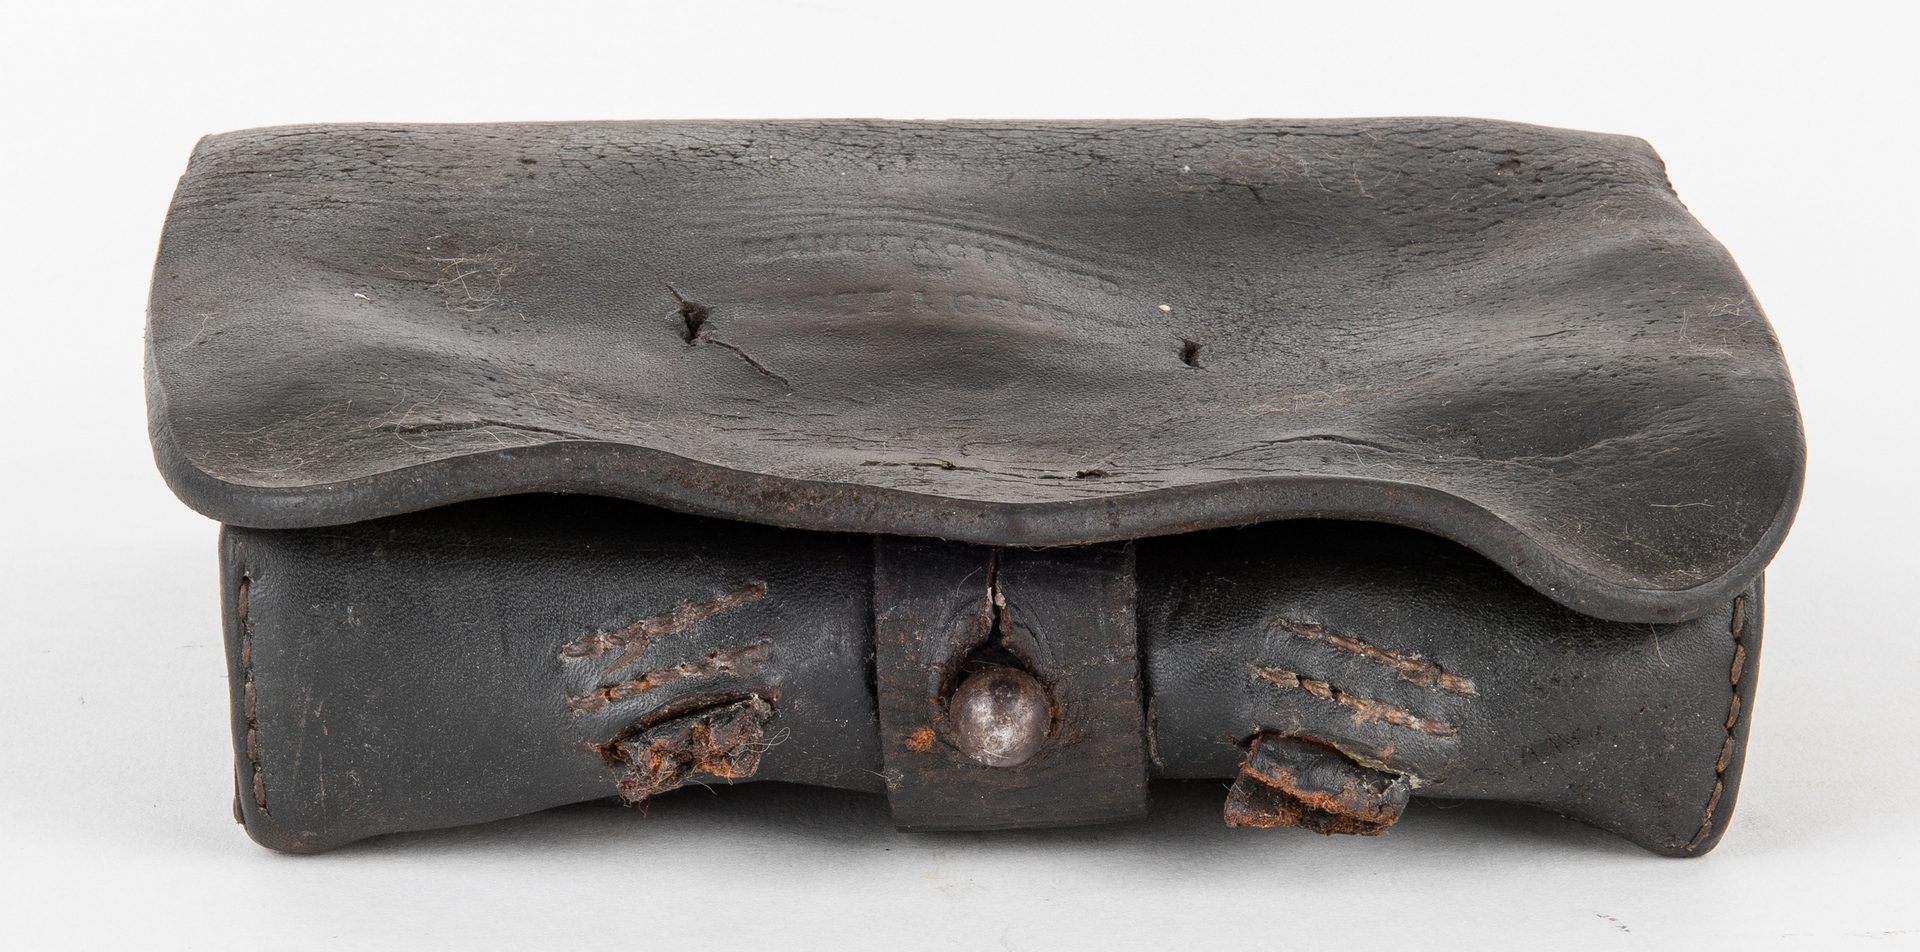 Lot 278: Confederate Magee & George Leather Cartridge Box with Sling